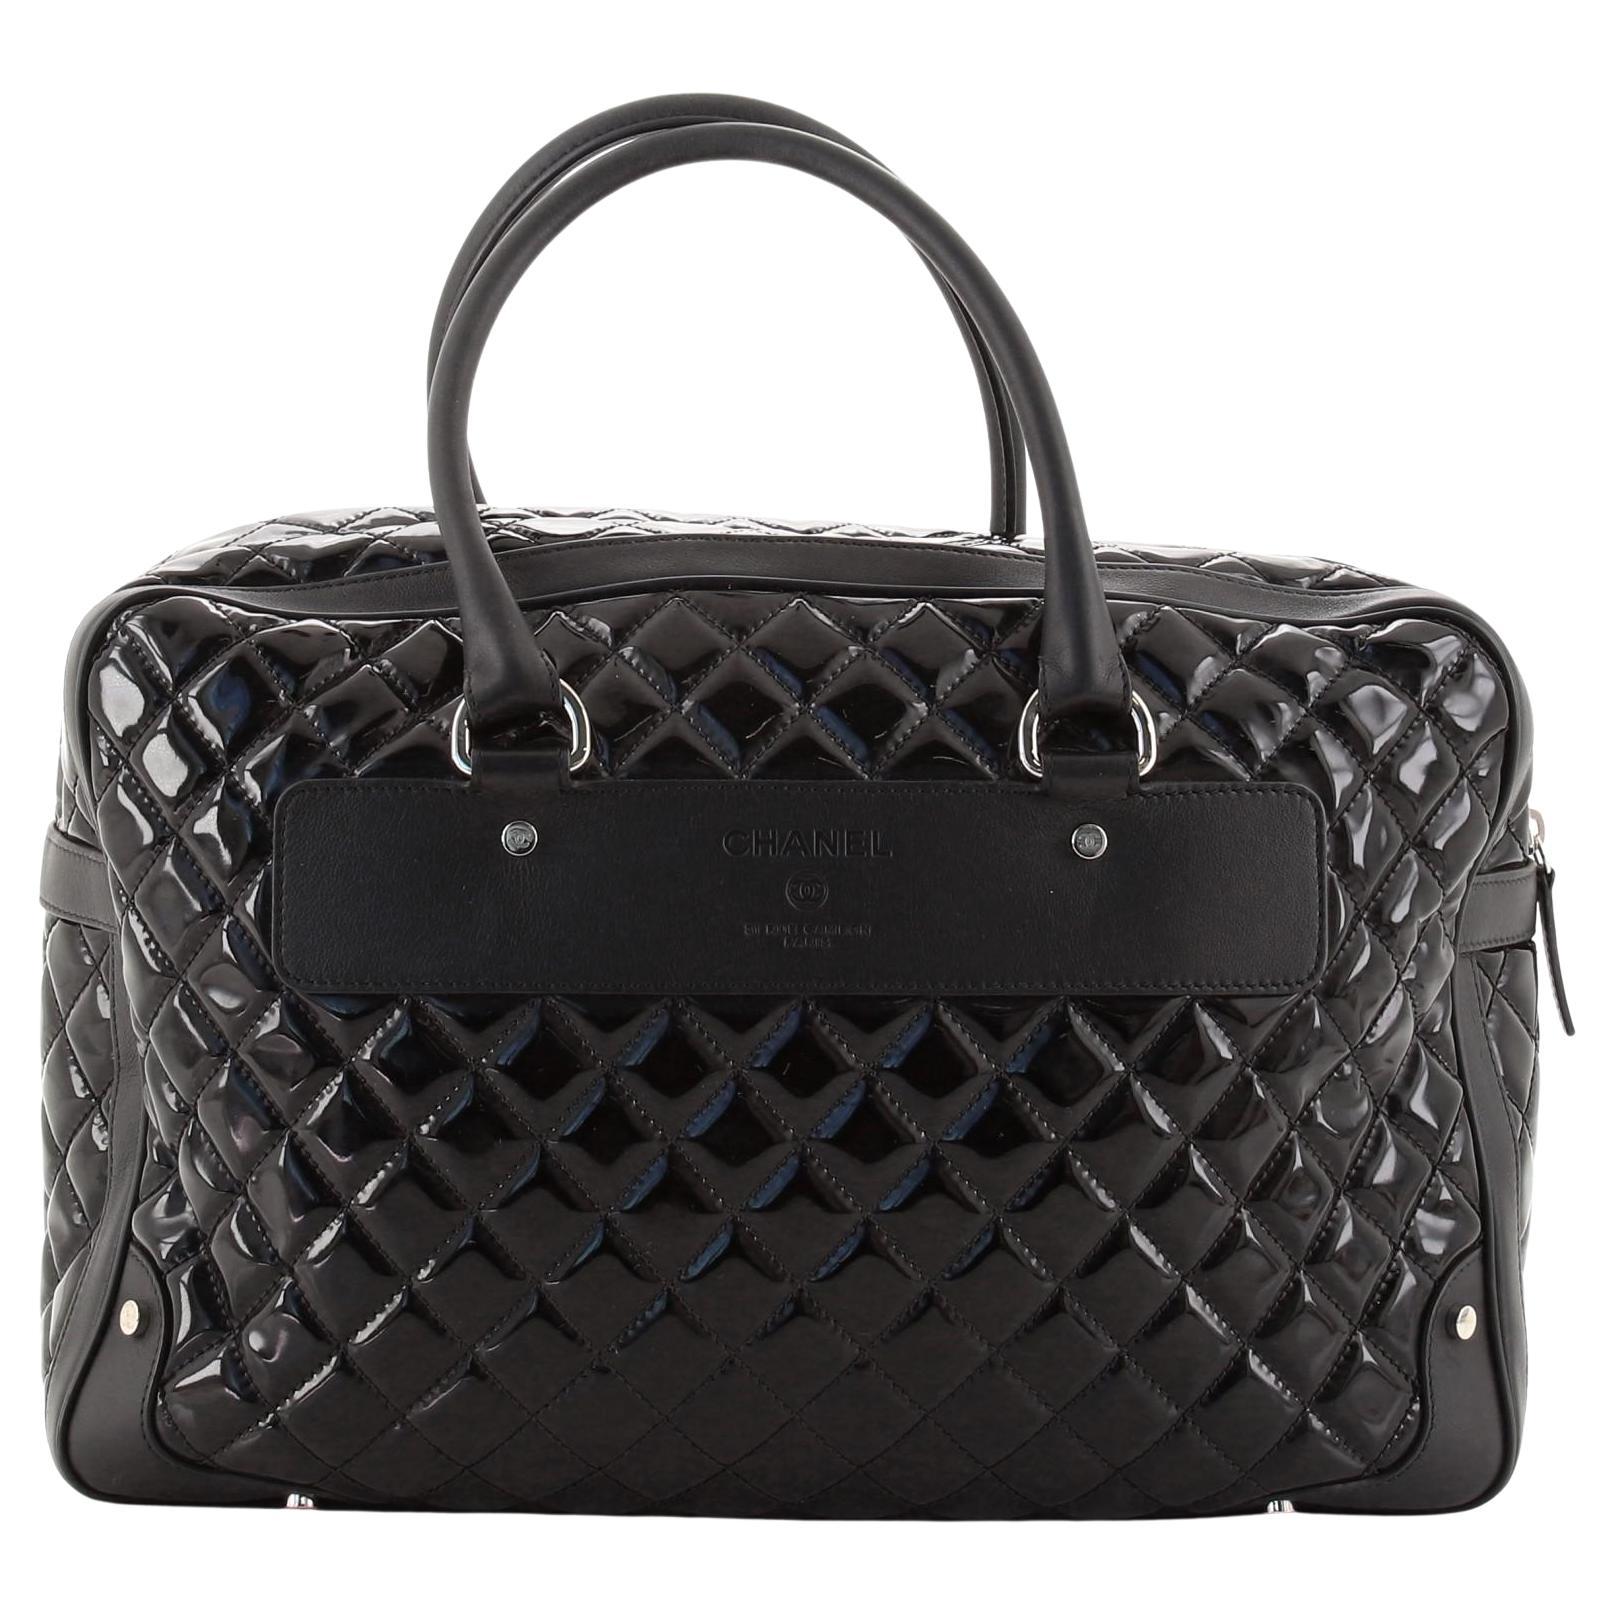 Chanel 2015 Timeless Quilted Carry-on Travel Tote Royal Black Patent Leather Bag

Spring Summer 2015 
Silver hardware
Black patent leather
Black calfskin leather trims
Dual-rolled leather handles
Exterior zip pocket with a padlock and a hanging